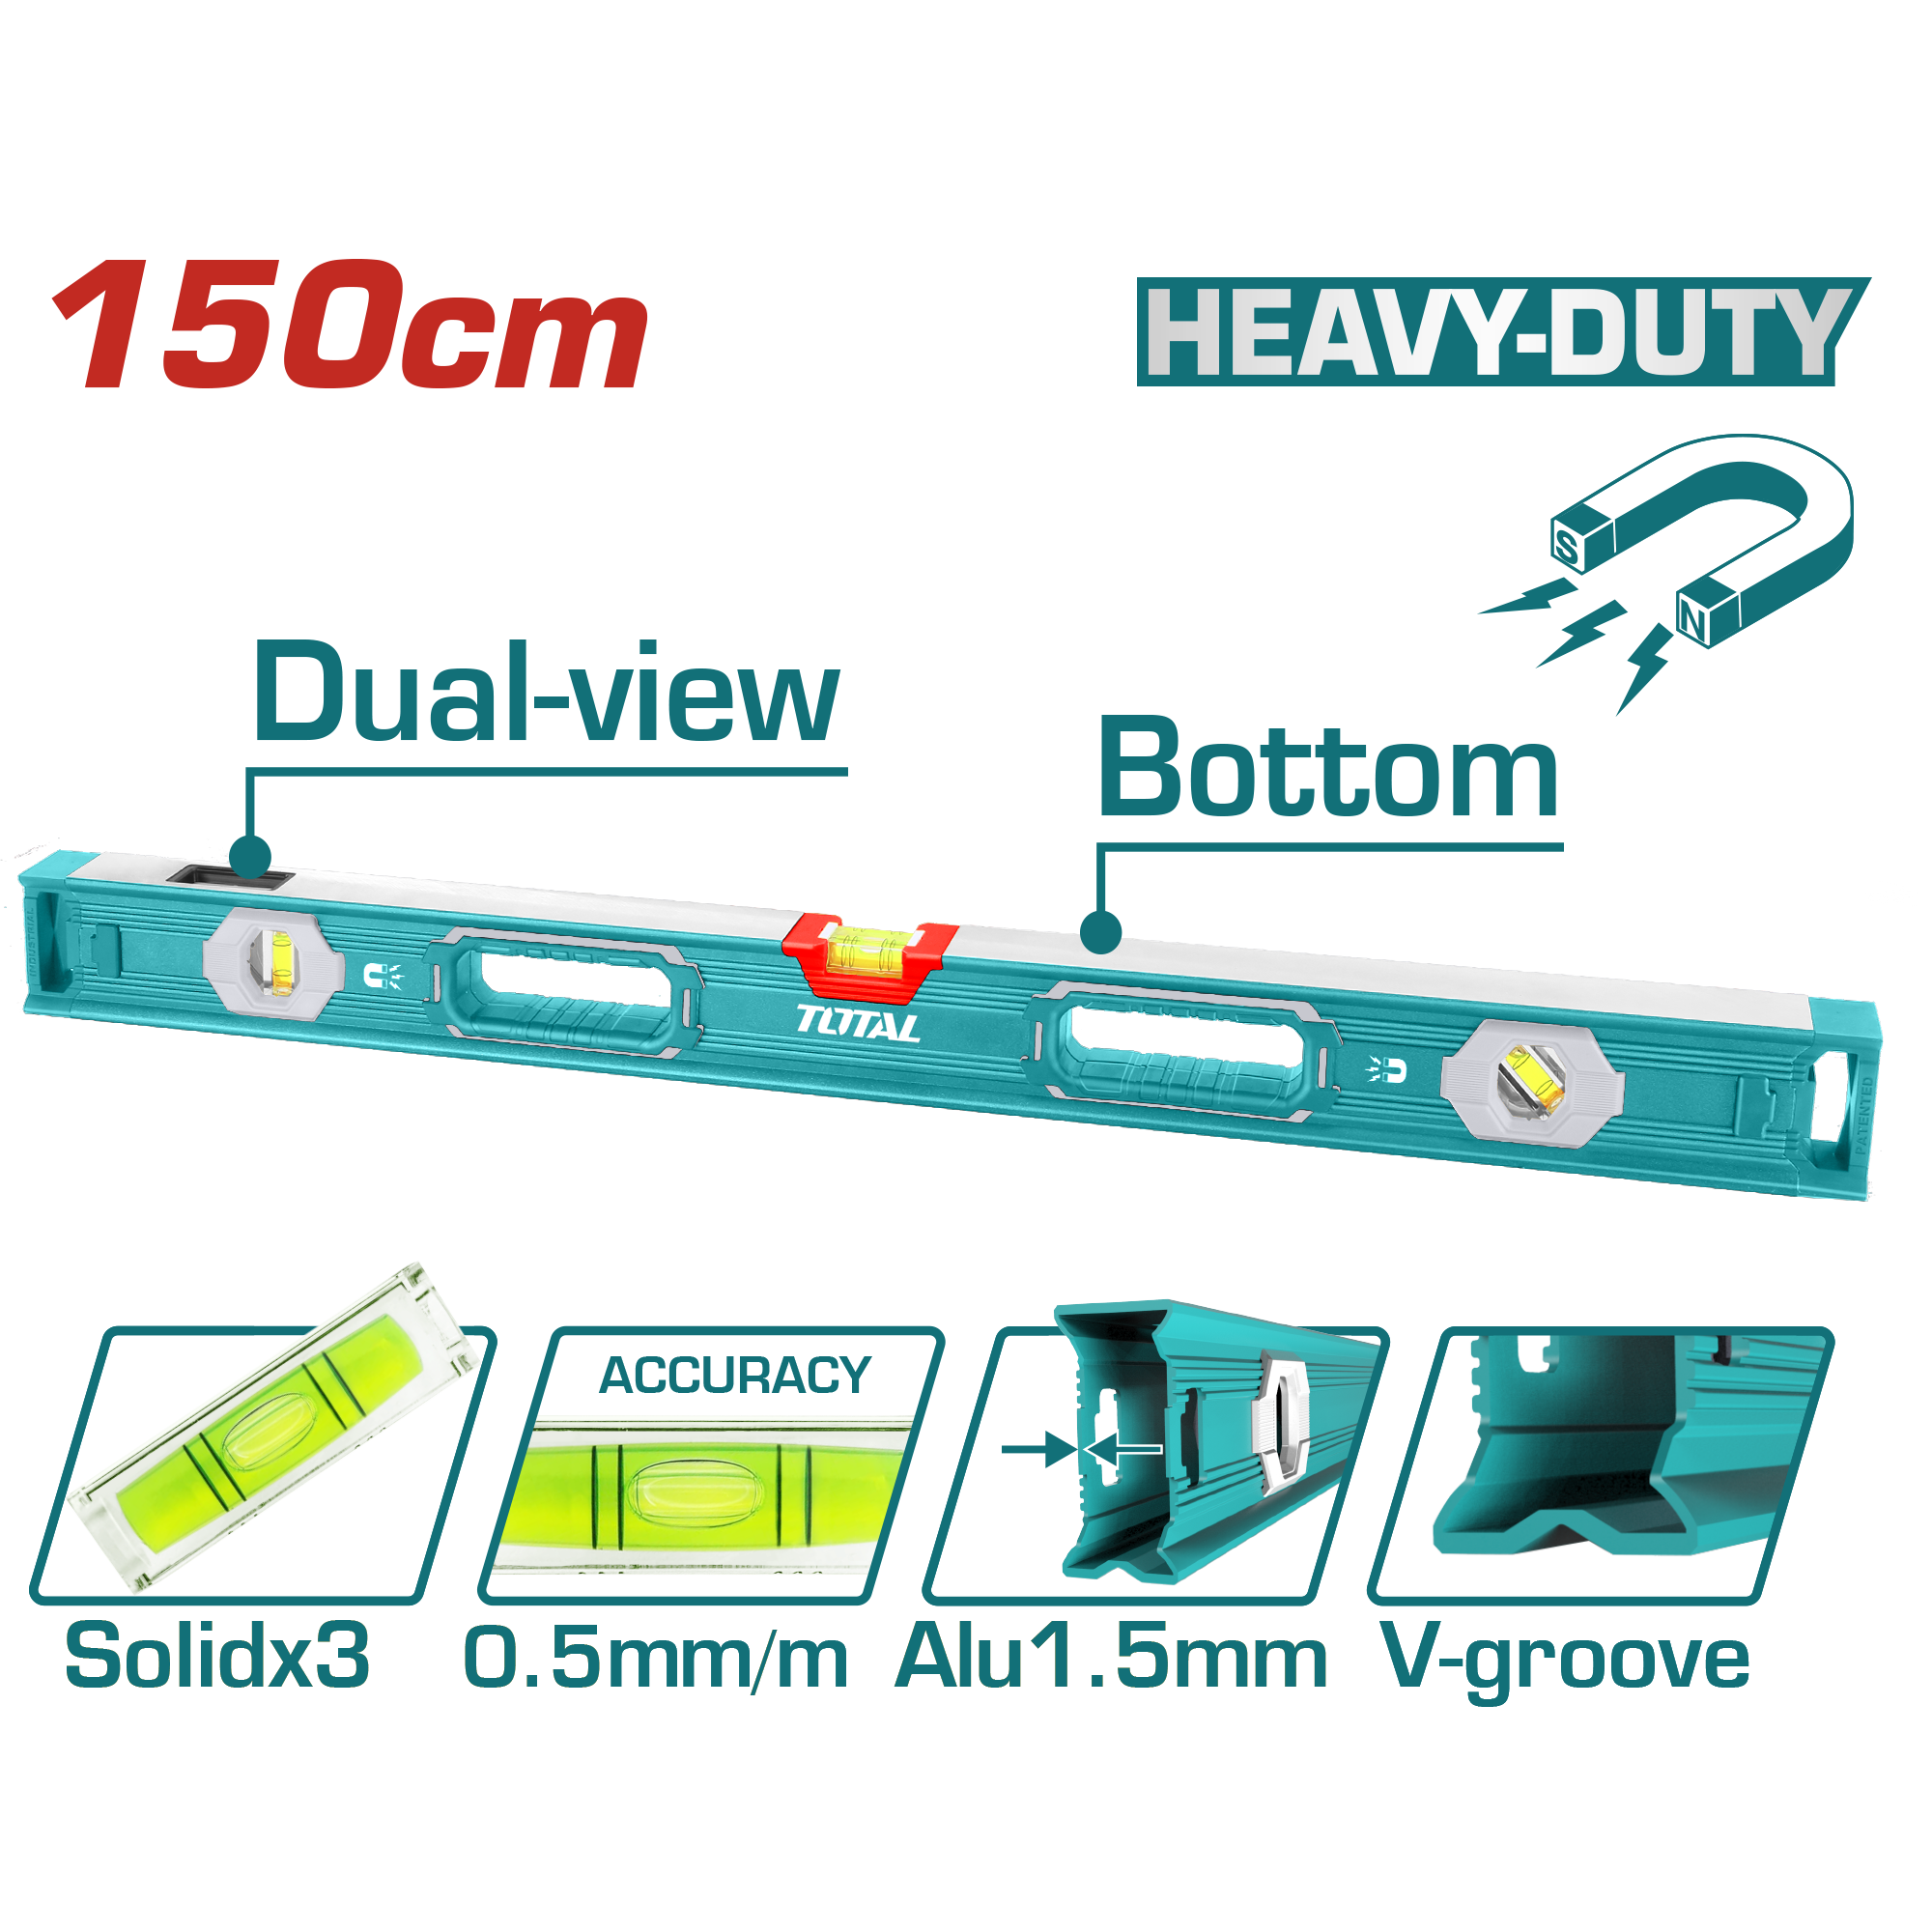 60" Heavy Duty Spirit level(With powerful magnets)